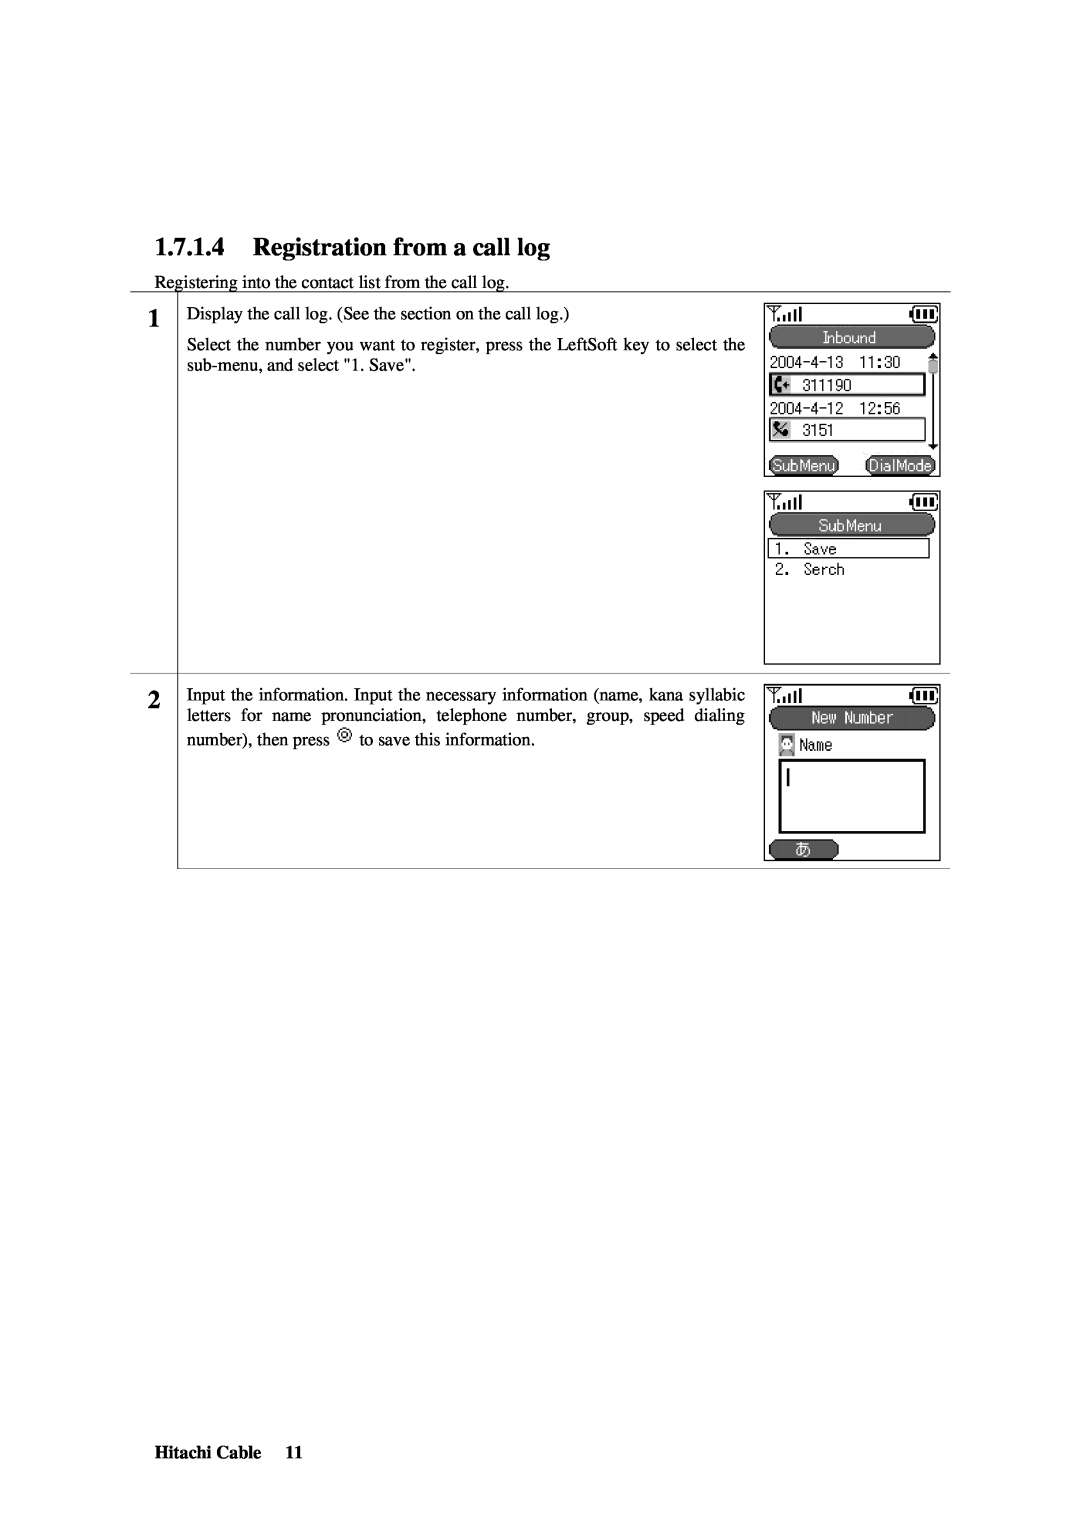 Hitachi TD61-2472 user manual Registration from a call log, Hitachi Cable 